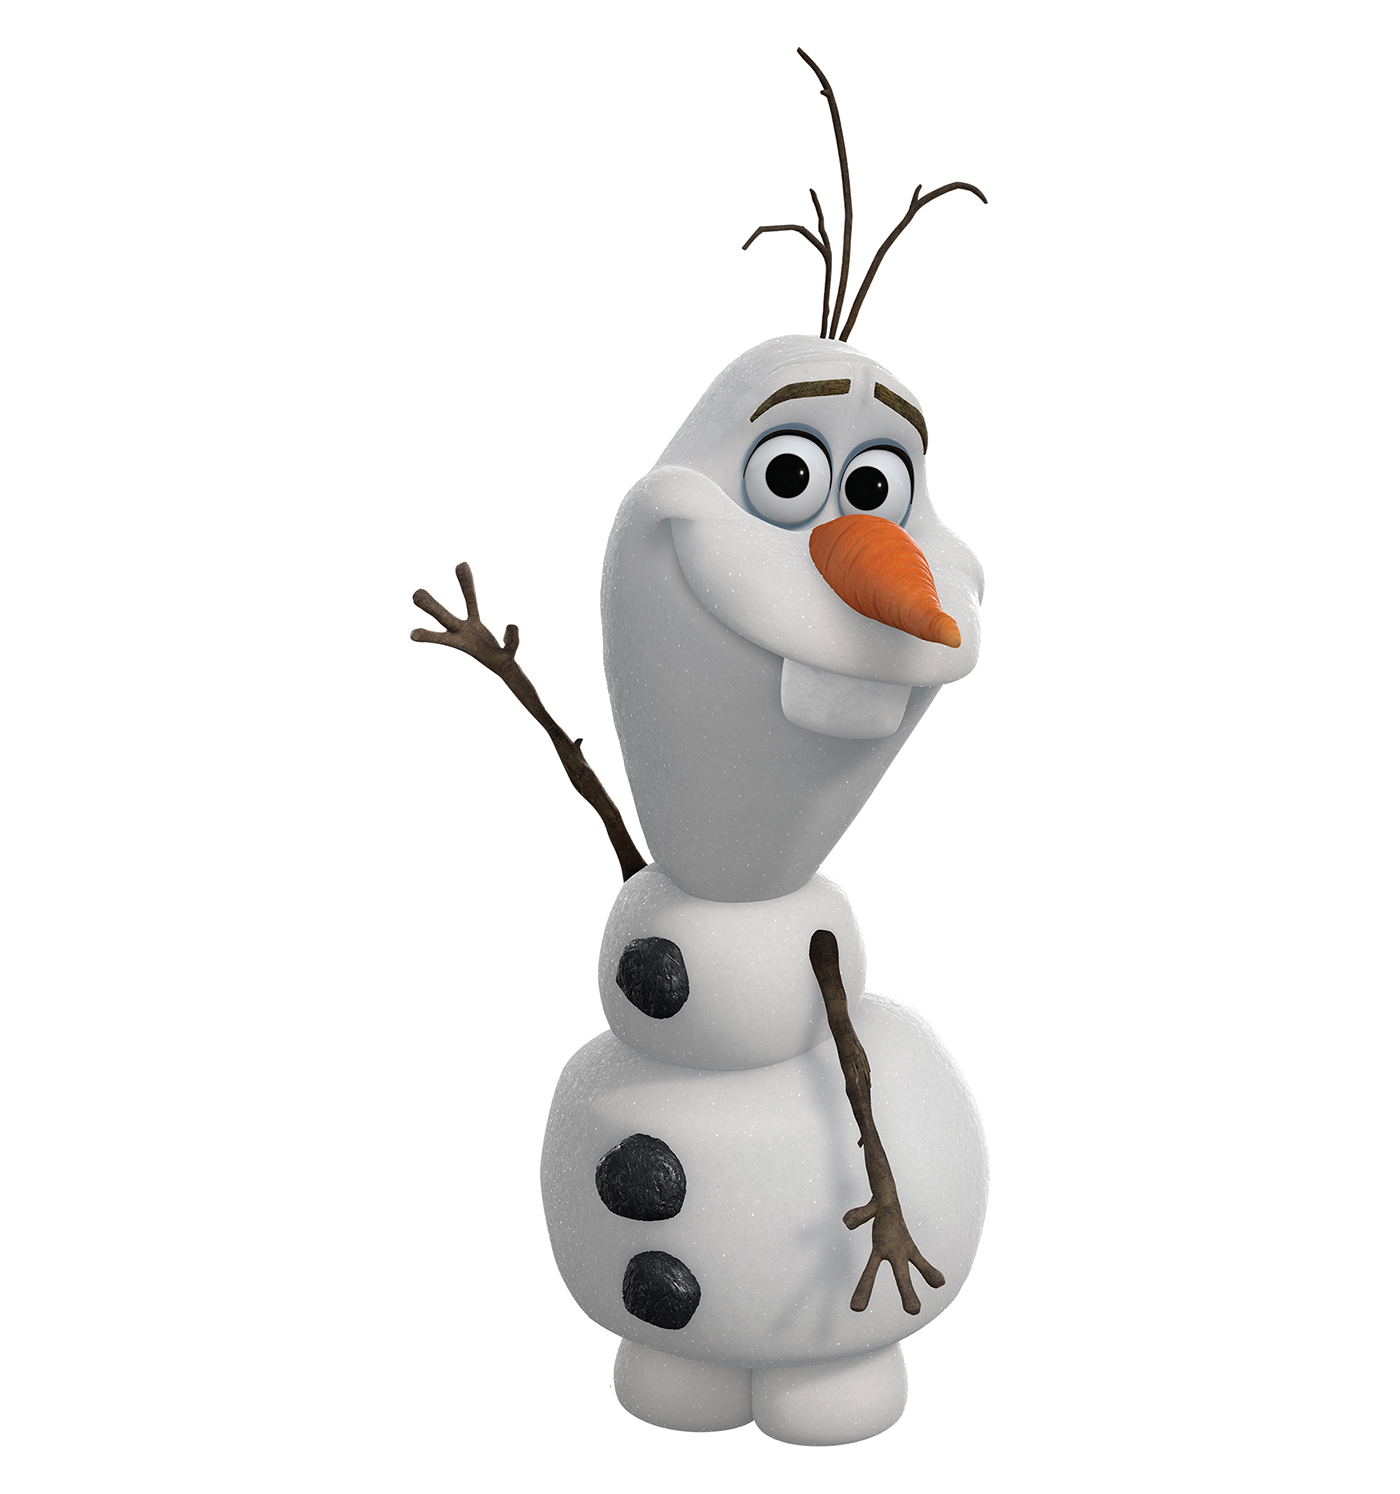 Frozen Olaf Photos PNG Image